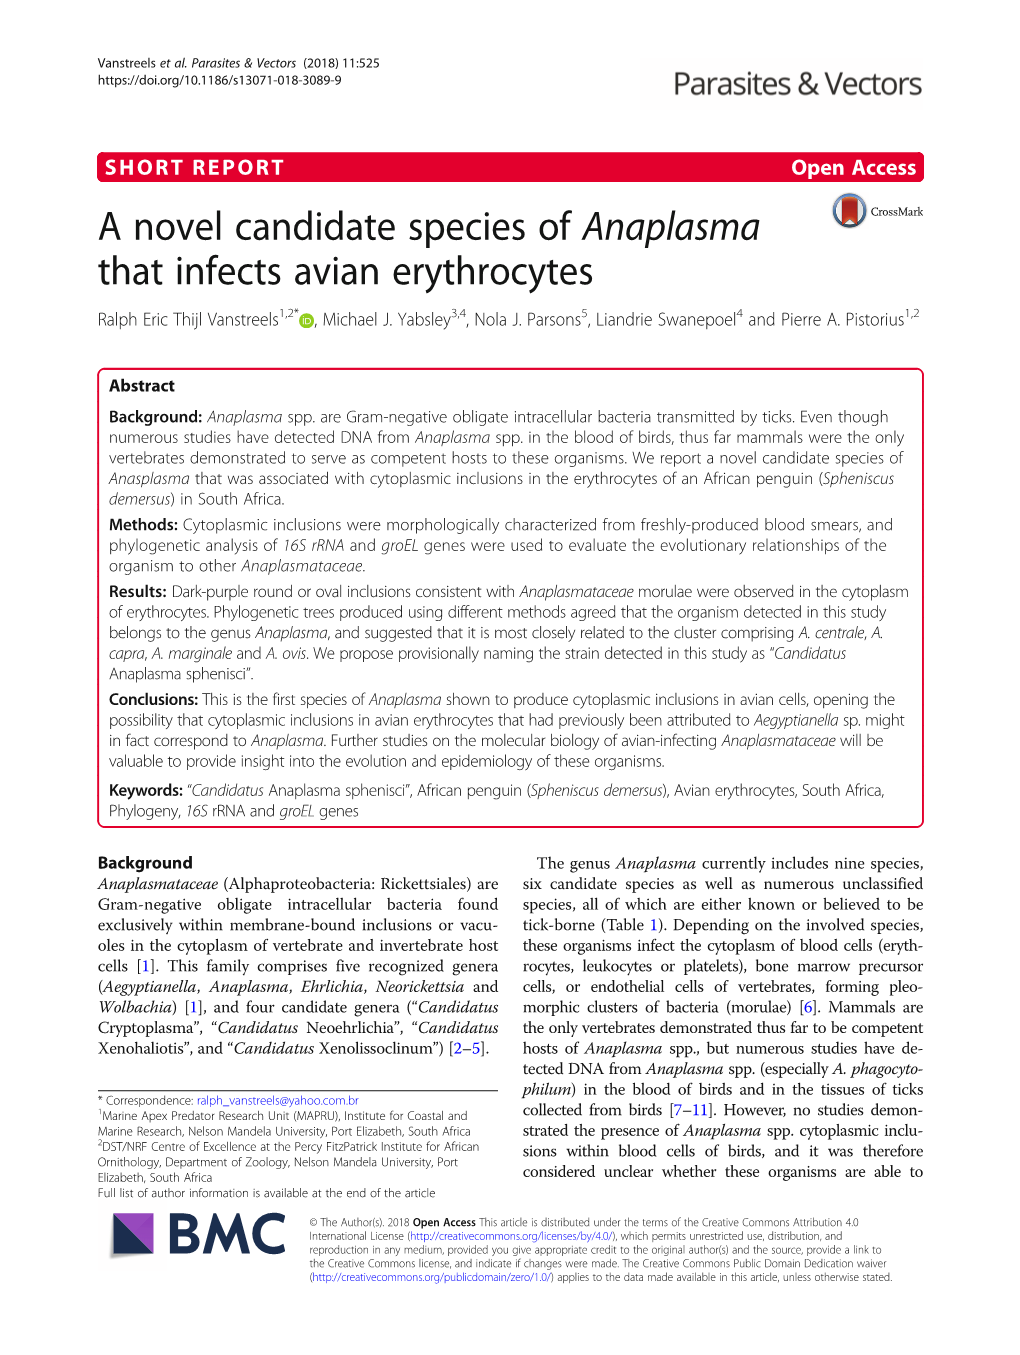 A Novel Candidate Species of Anaplasma That Infects Avian Erythrocytes Ralph Eric Thijl Vanstreels1,2* , Michael J